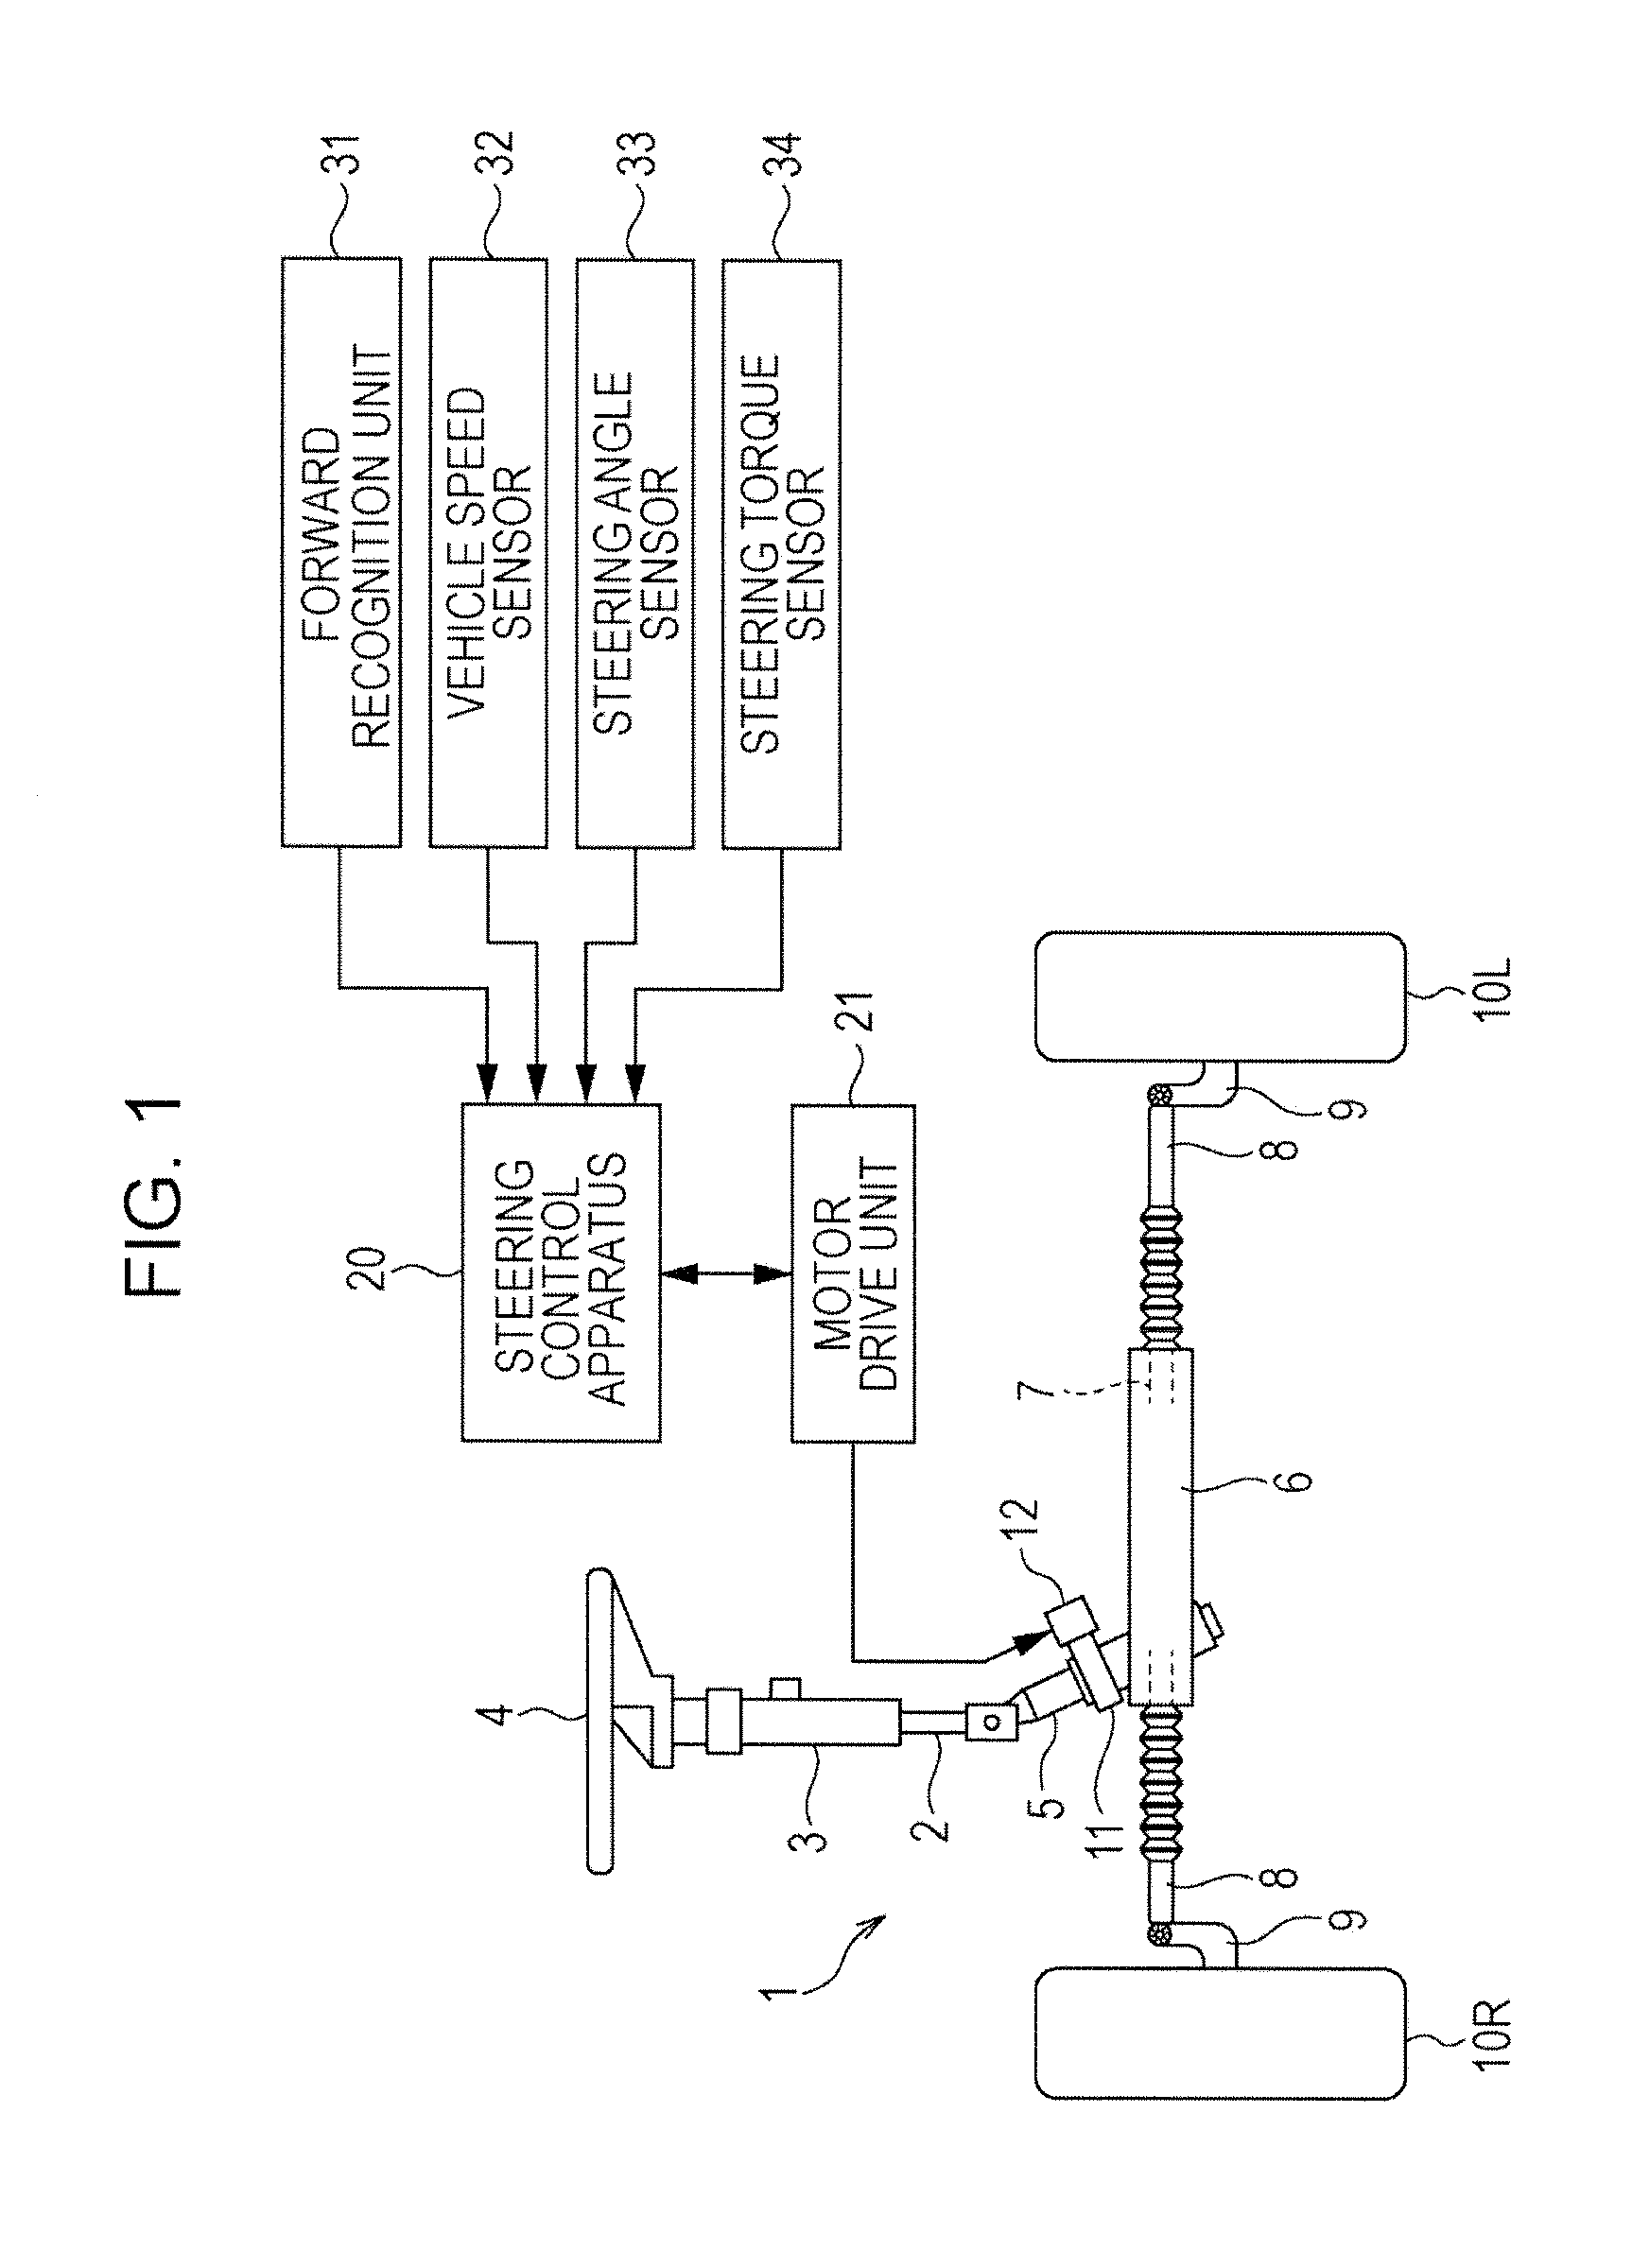 Lane keeping control system for vehicle